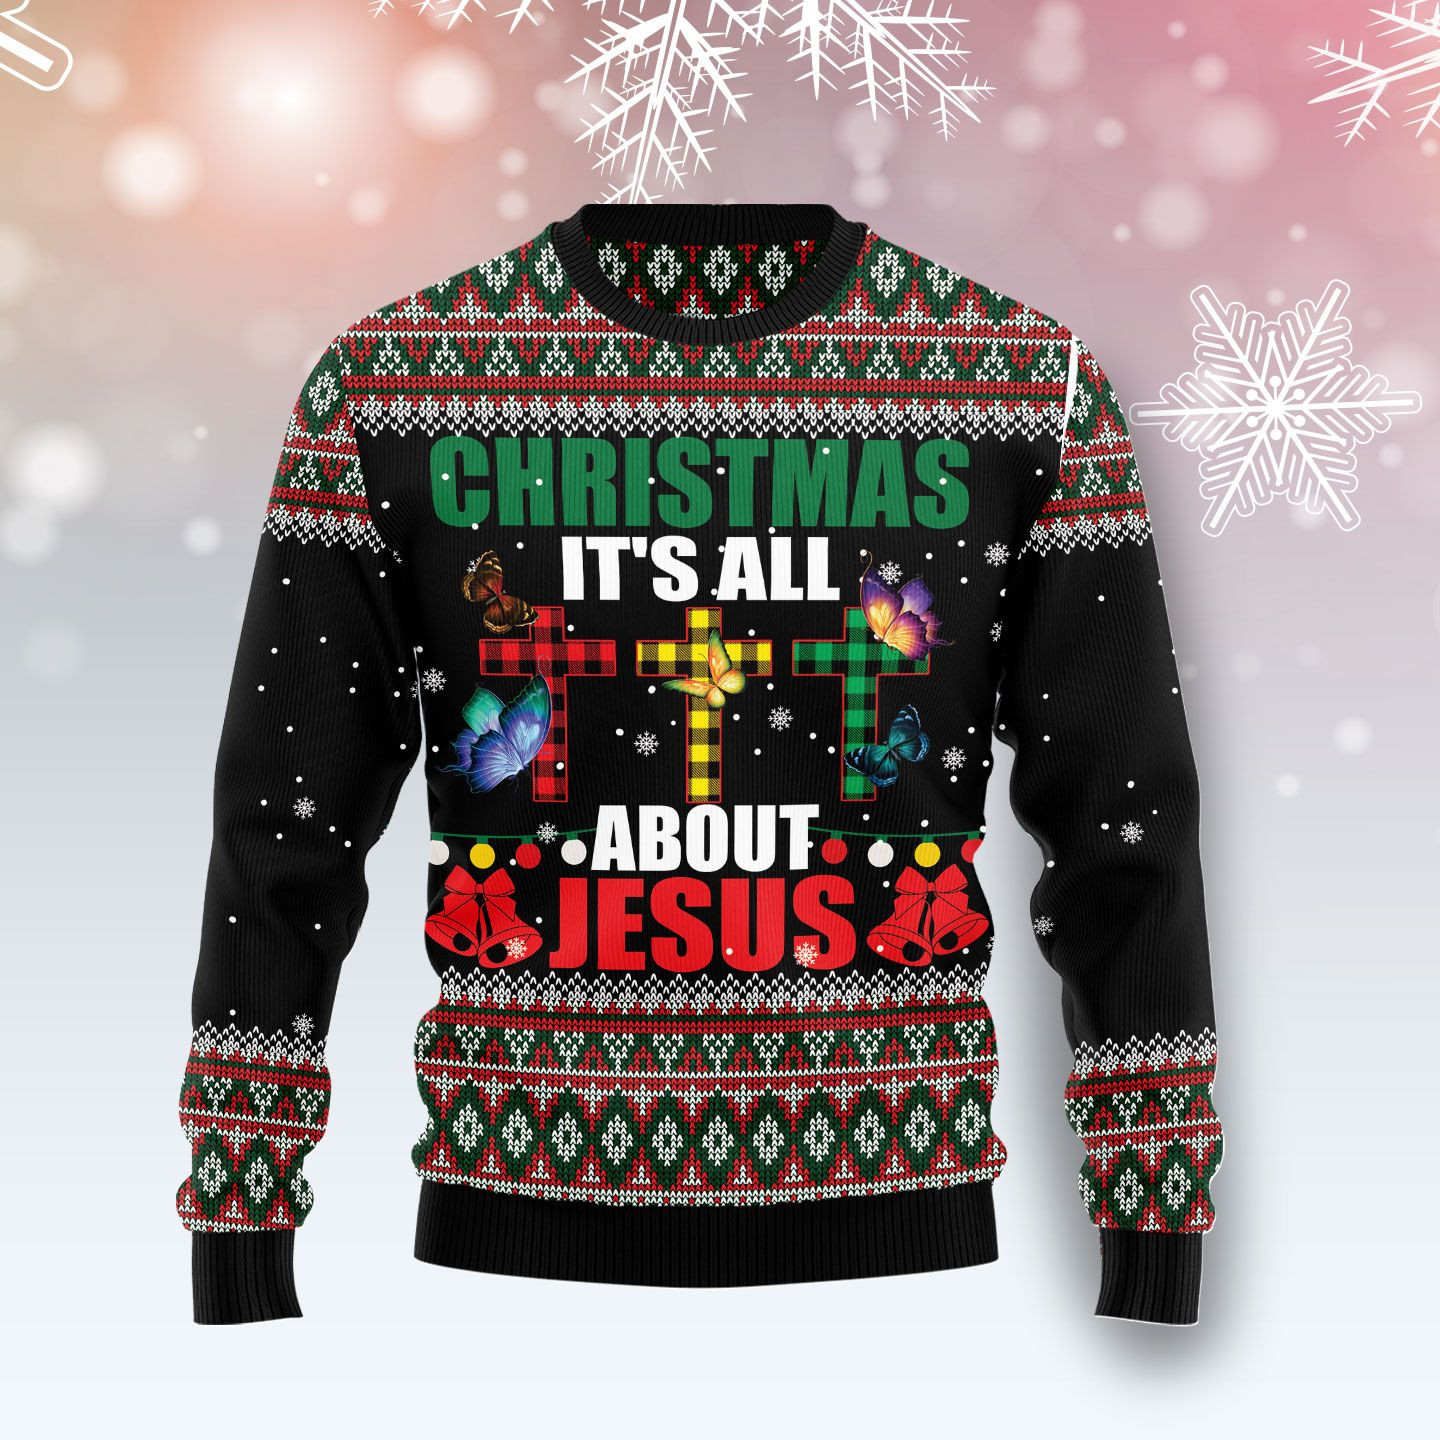 Butterfly All About Jesus Ugly Christmas Sweater, Ugly Sweater For Men Women, Holiday Sweater